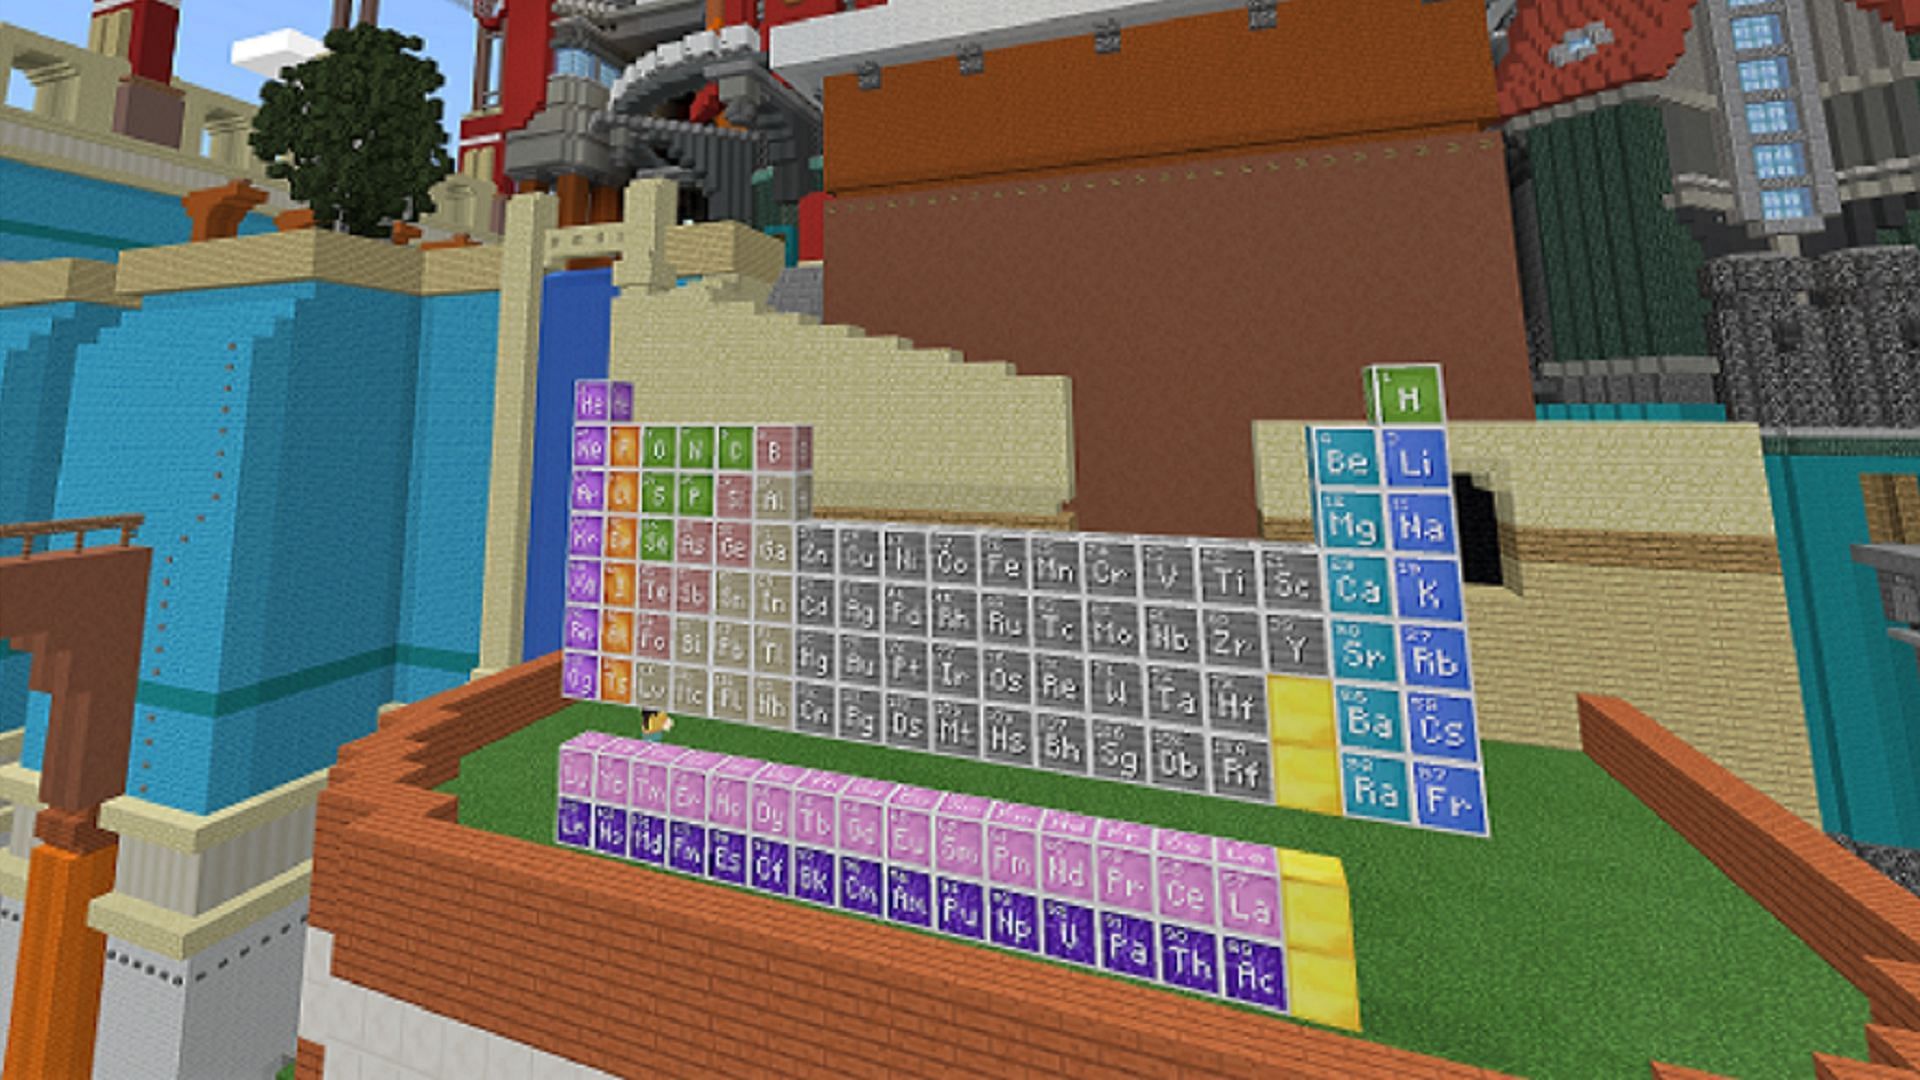 The World of Chemistry highlights one of the main gameplay aspects of the Education Edition (Image via Mojang)